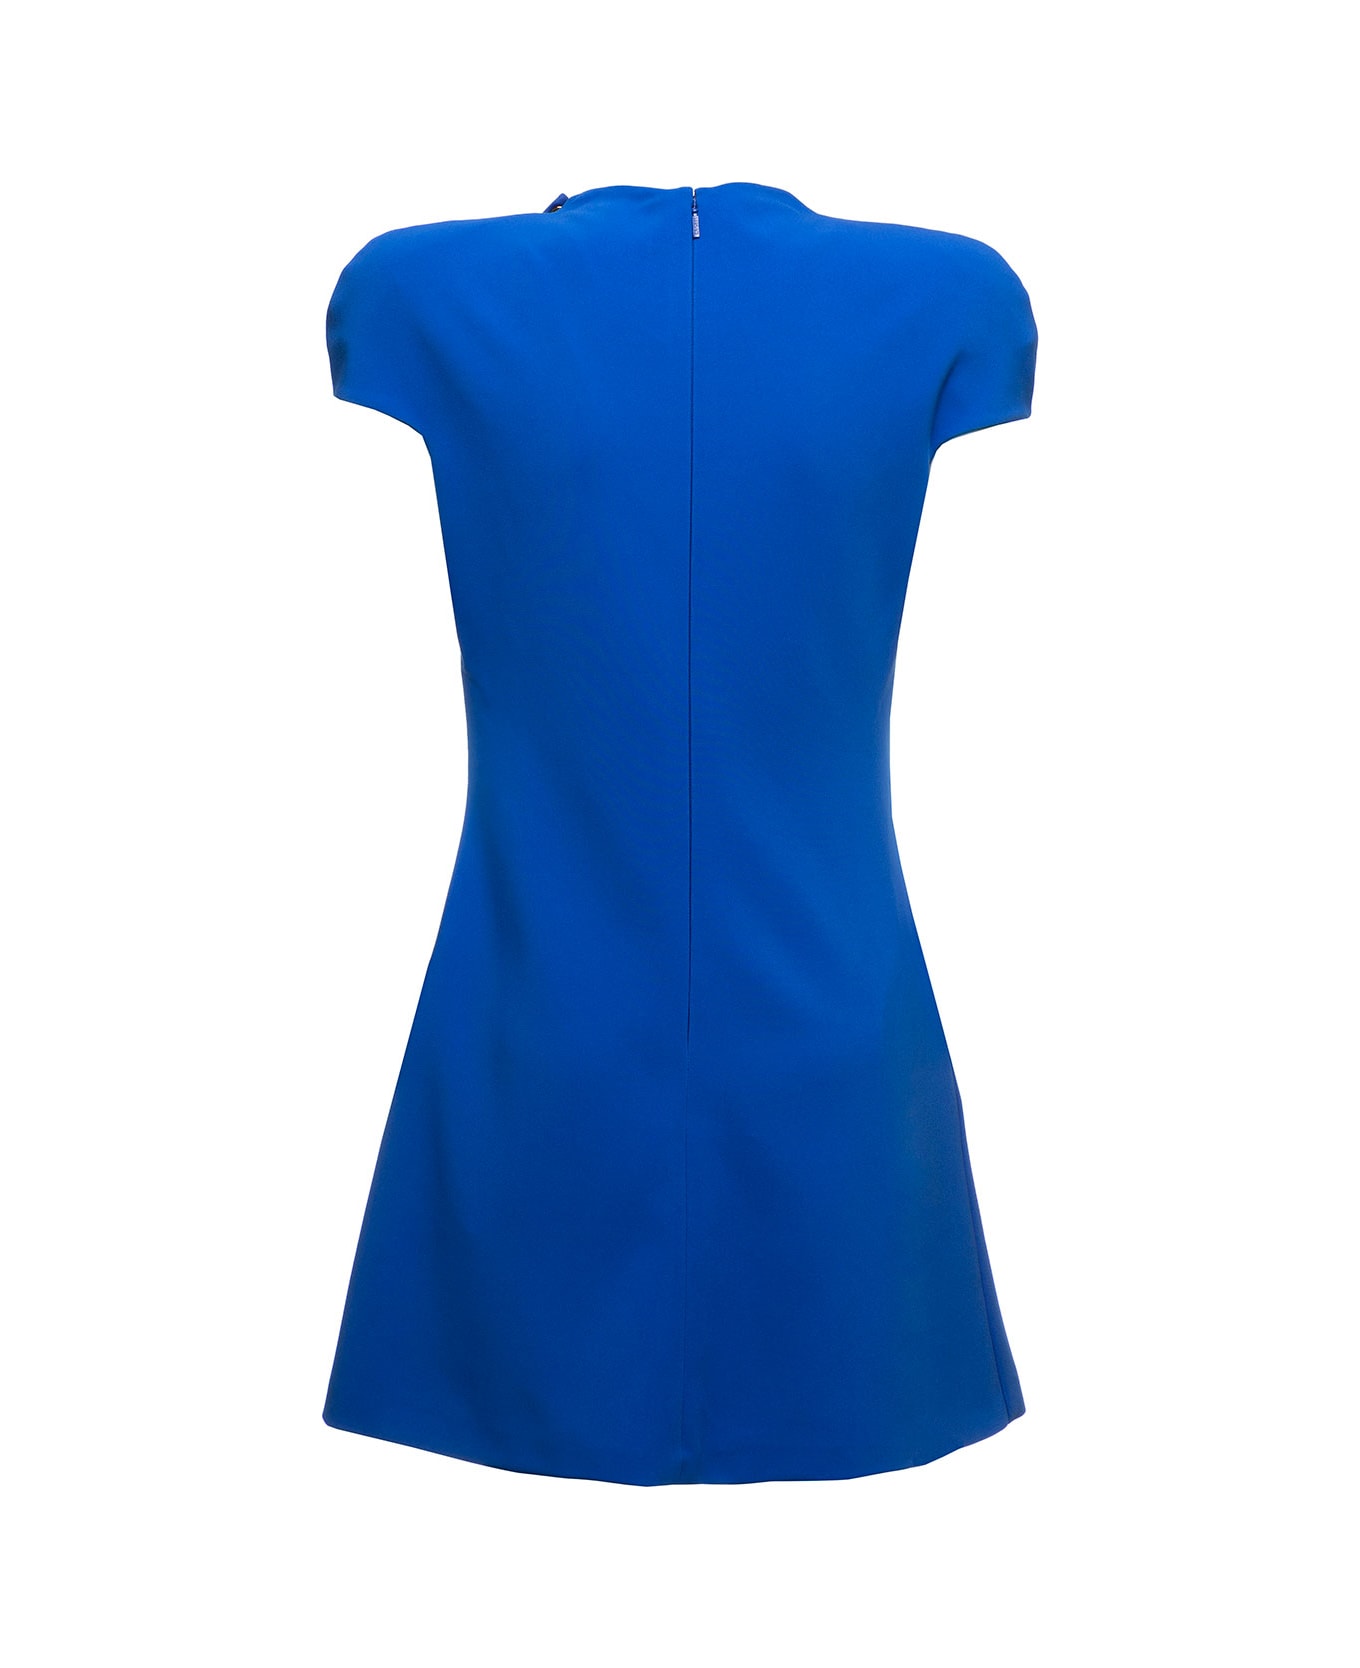 Versace Electric Blue Midi Dress In Virgin Wool Knit With Cut Out And Medusa Detailing Versace Woman - Blu